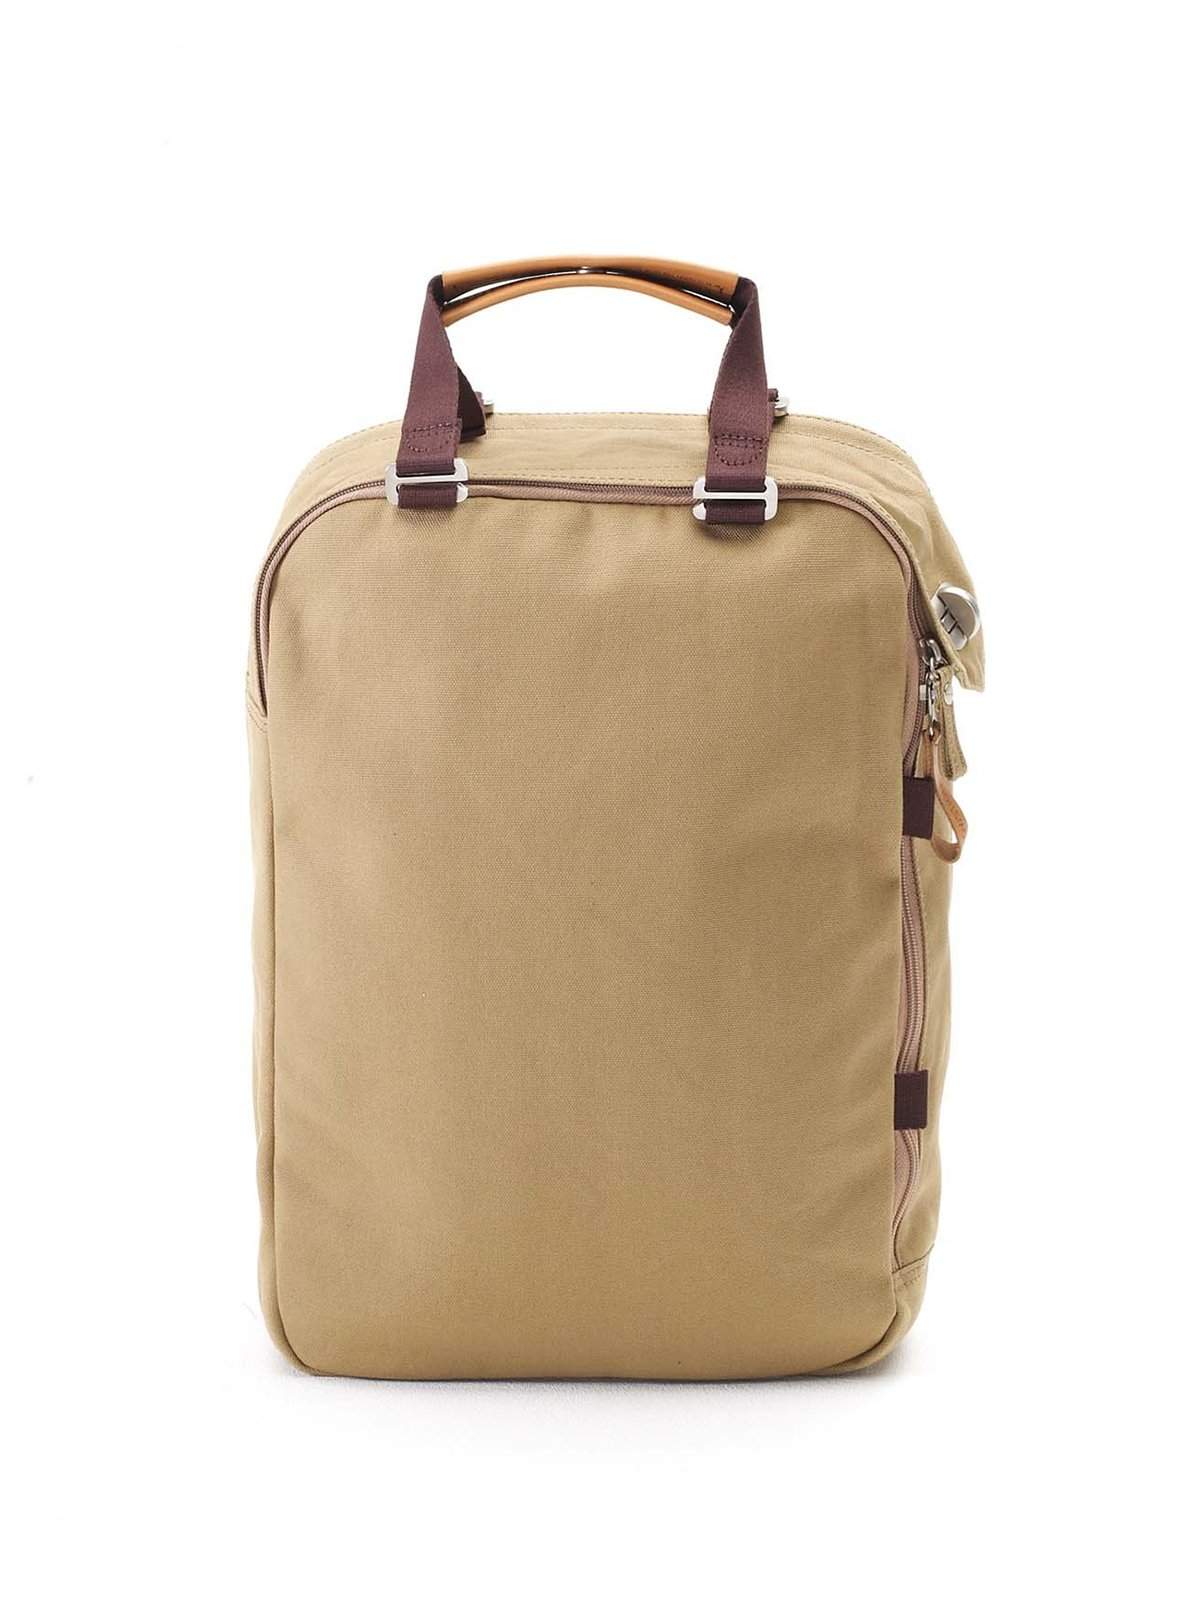 Qwstion Daypack Organic Camel - MORE by Morello Indonesia